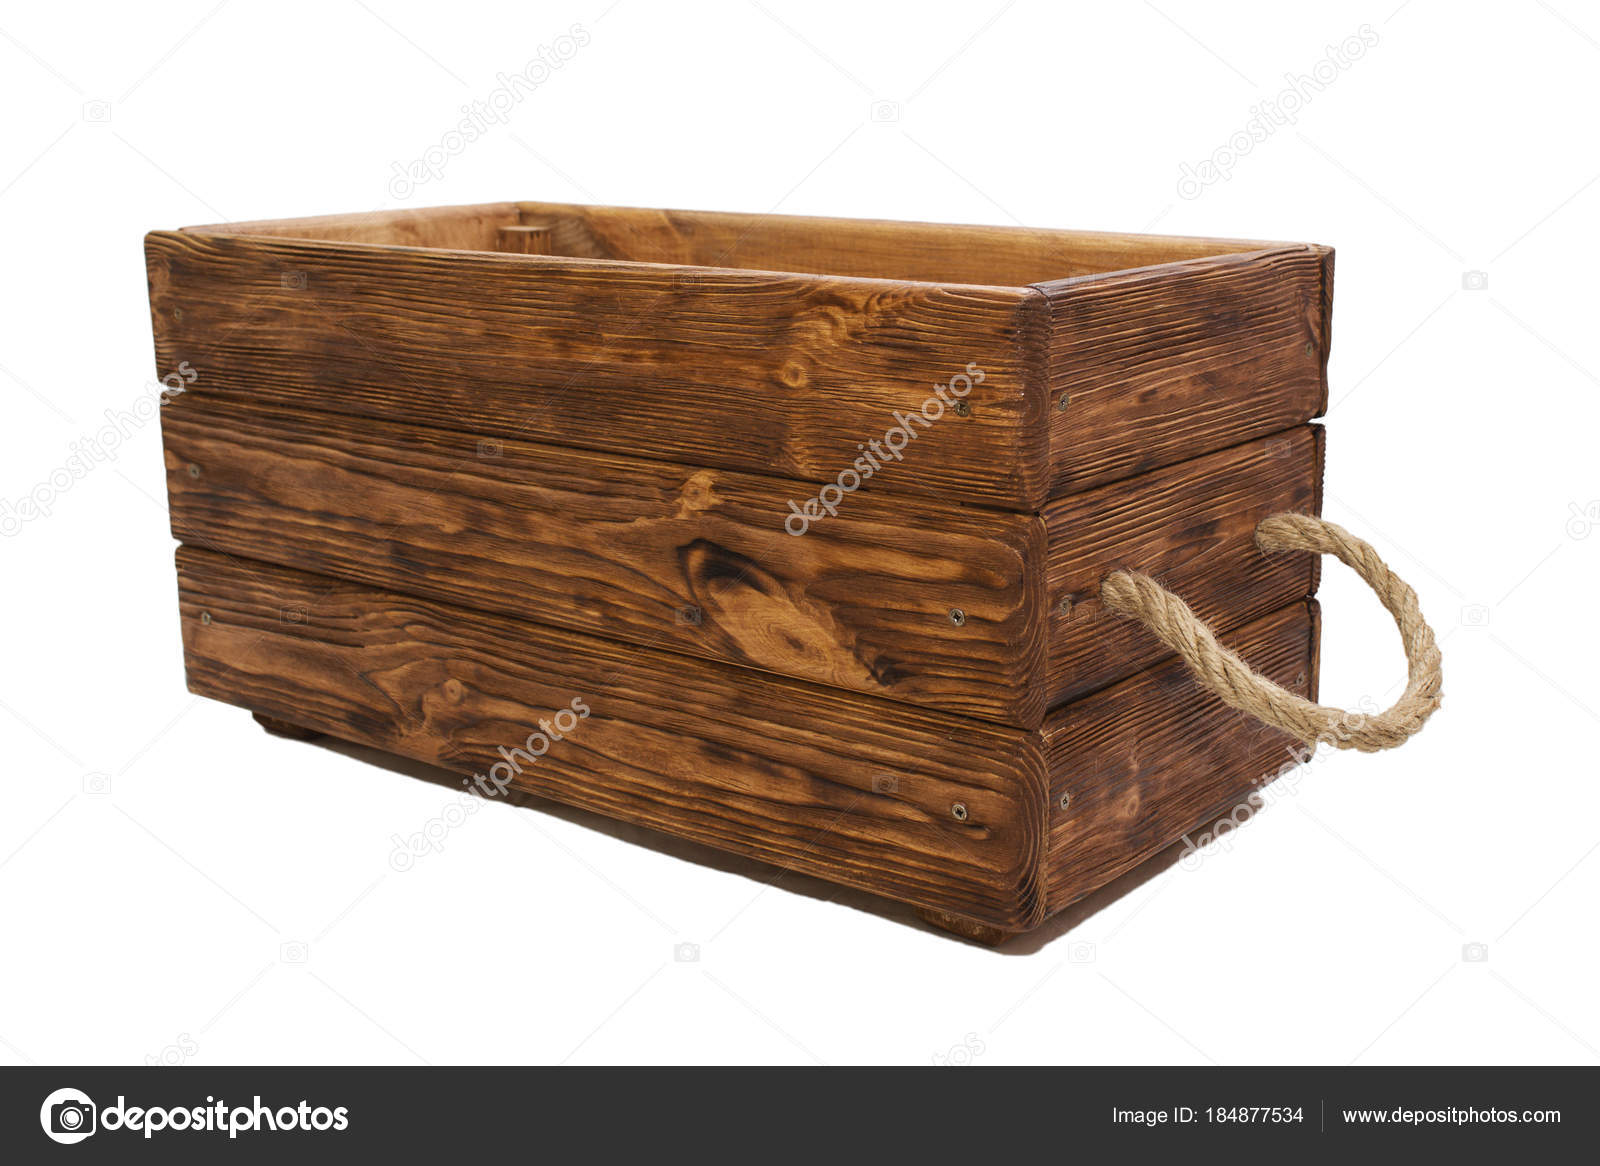 Old wooden crate, rope handles. isolated on white background. — Stock Photo  © mihail39 #184877534